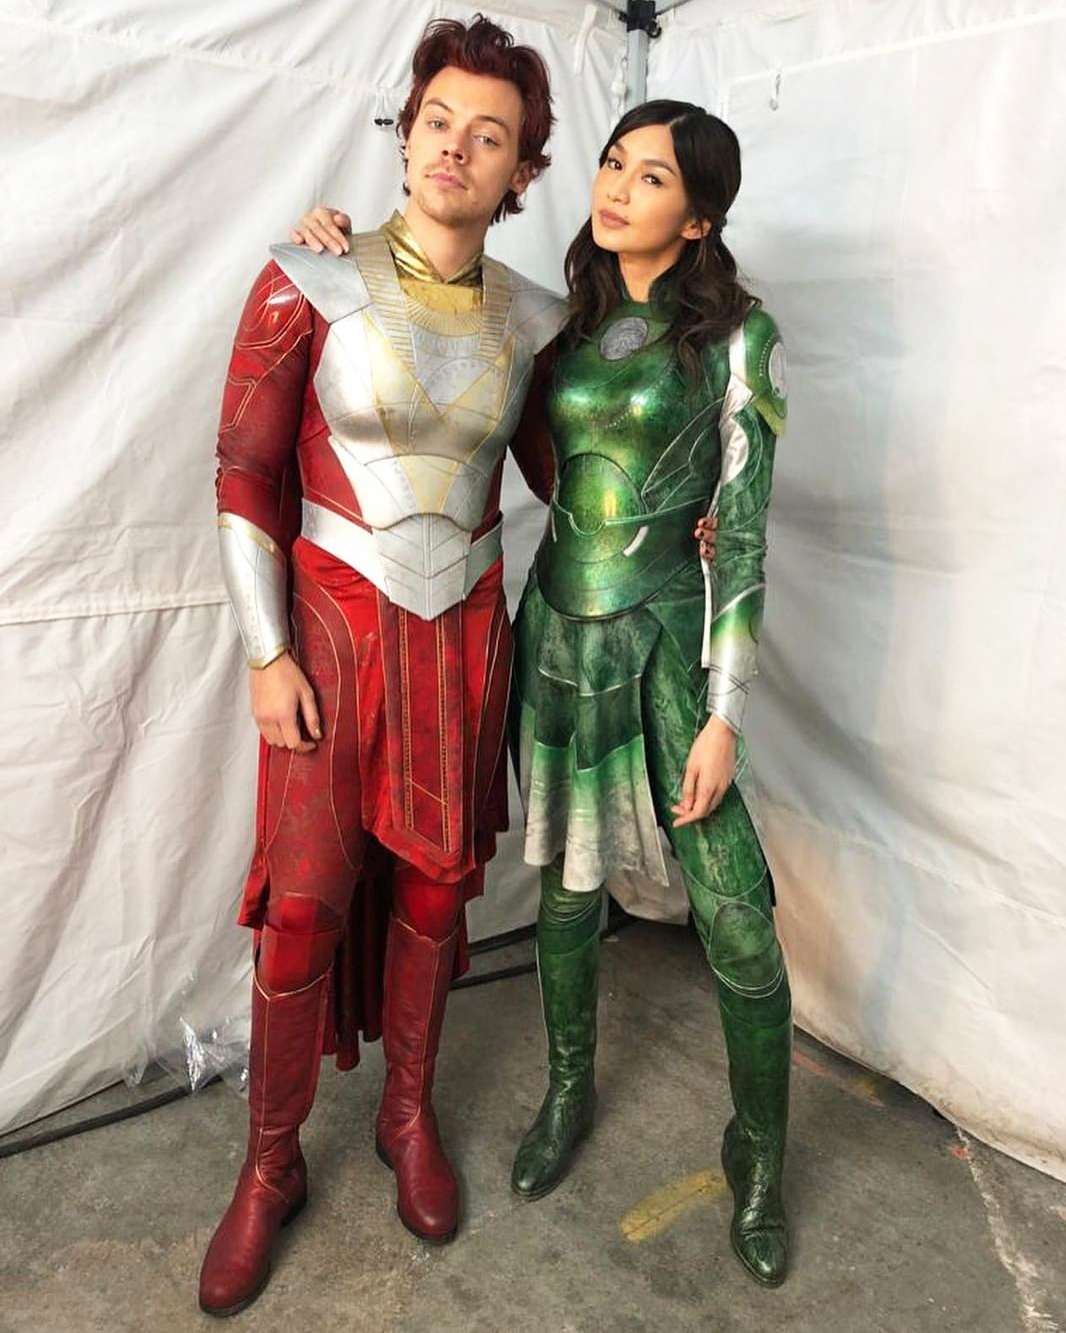 Harry Styles Smiles Wearing His Eternals Costume in Throwback Photos Shared by Gemma Chan